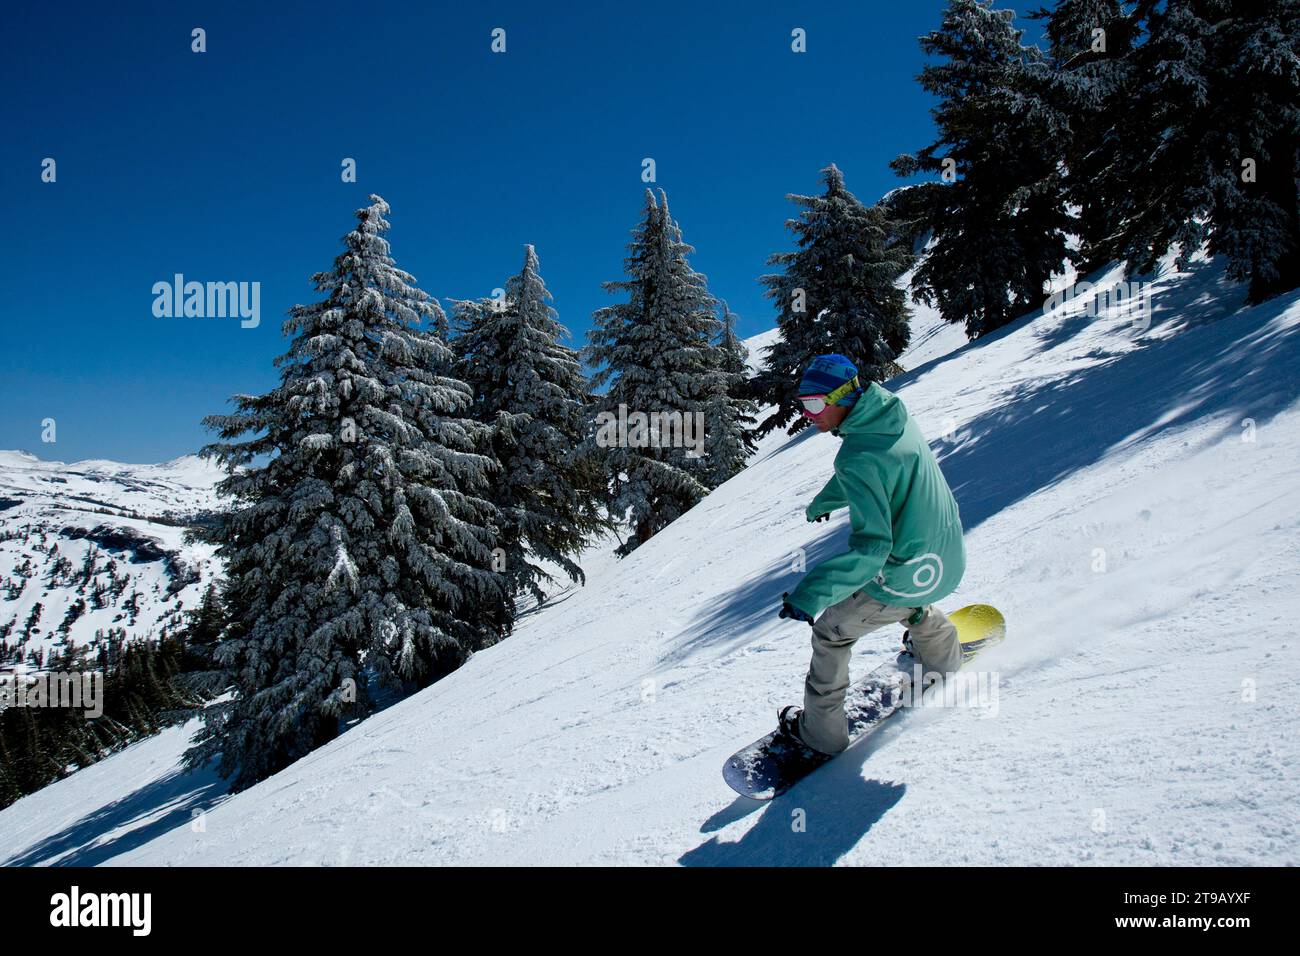 Snowboarder riding spring conditions with new snow in the trees. Stock Photo